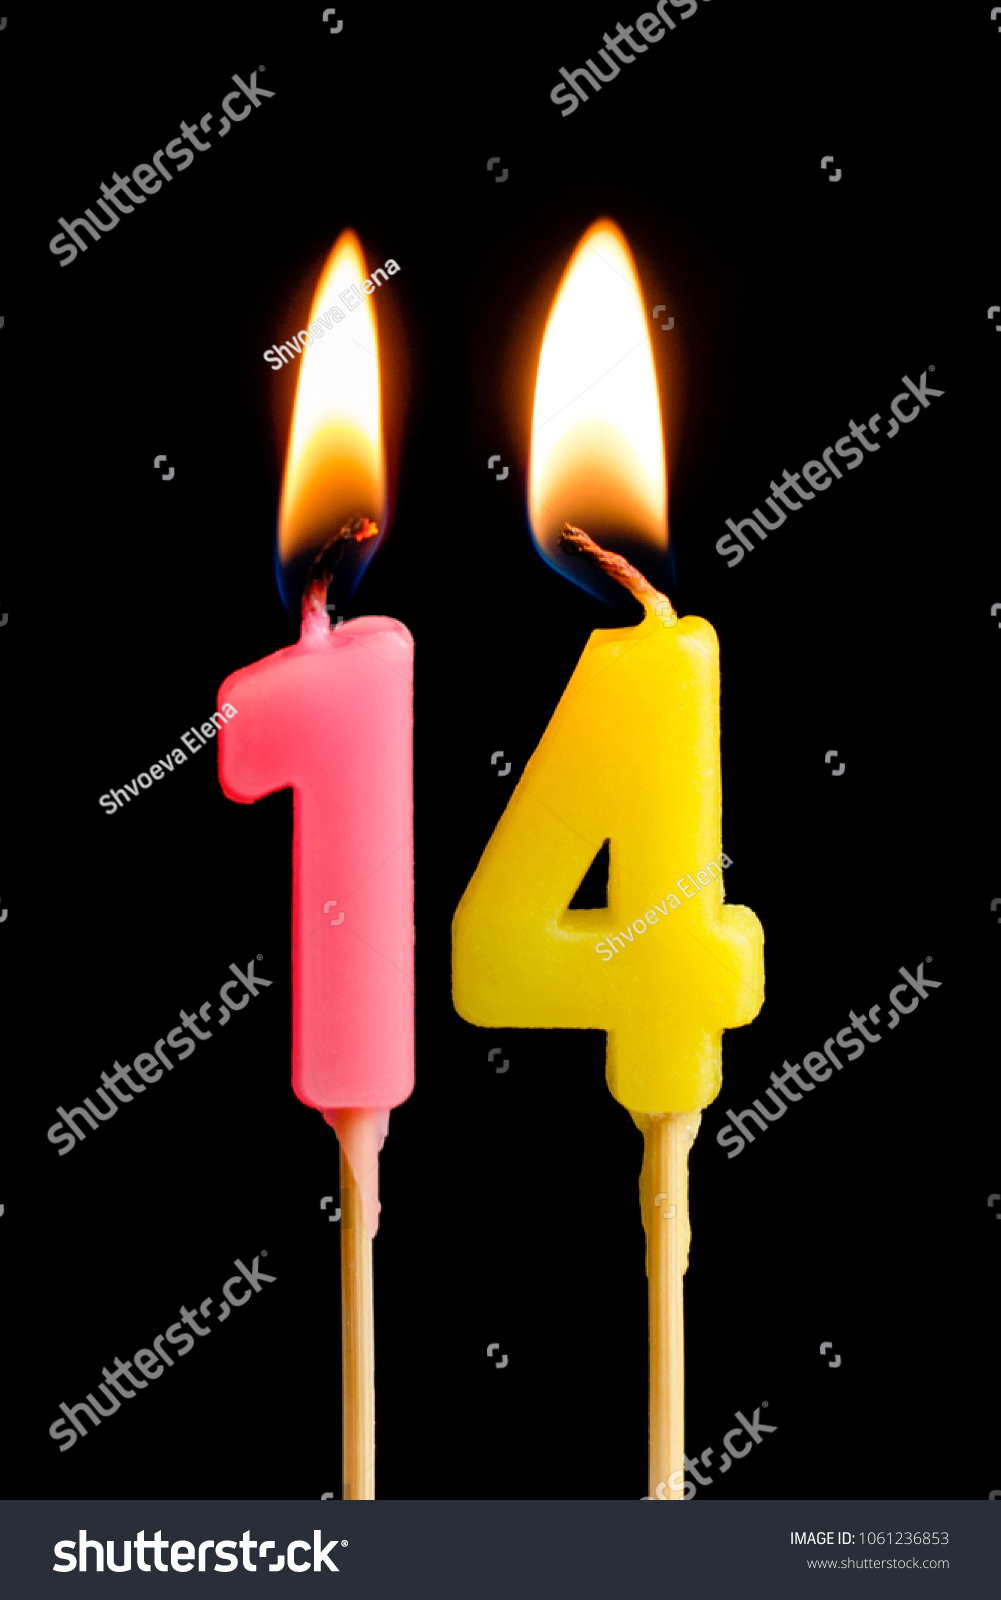 Burning candles in the form of 14 fourteen figures (numbers, dates) for cake isolated on black background. The concept of celebrating a birthday, anniversary, important date, holiday, table setting #1061236853